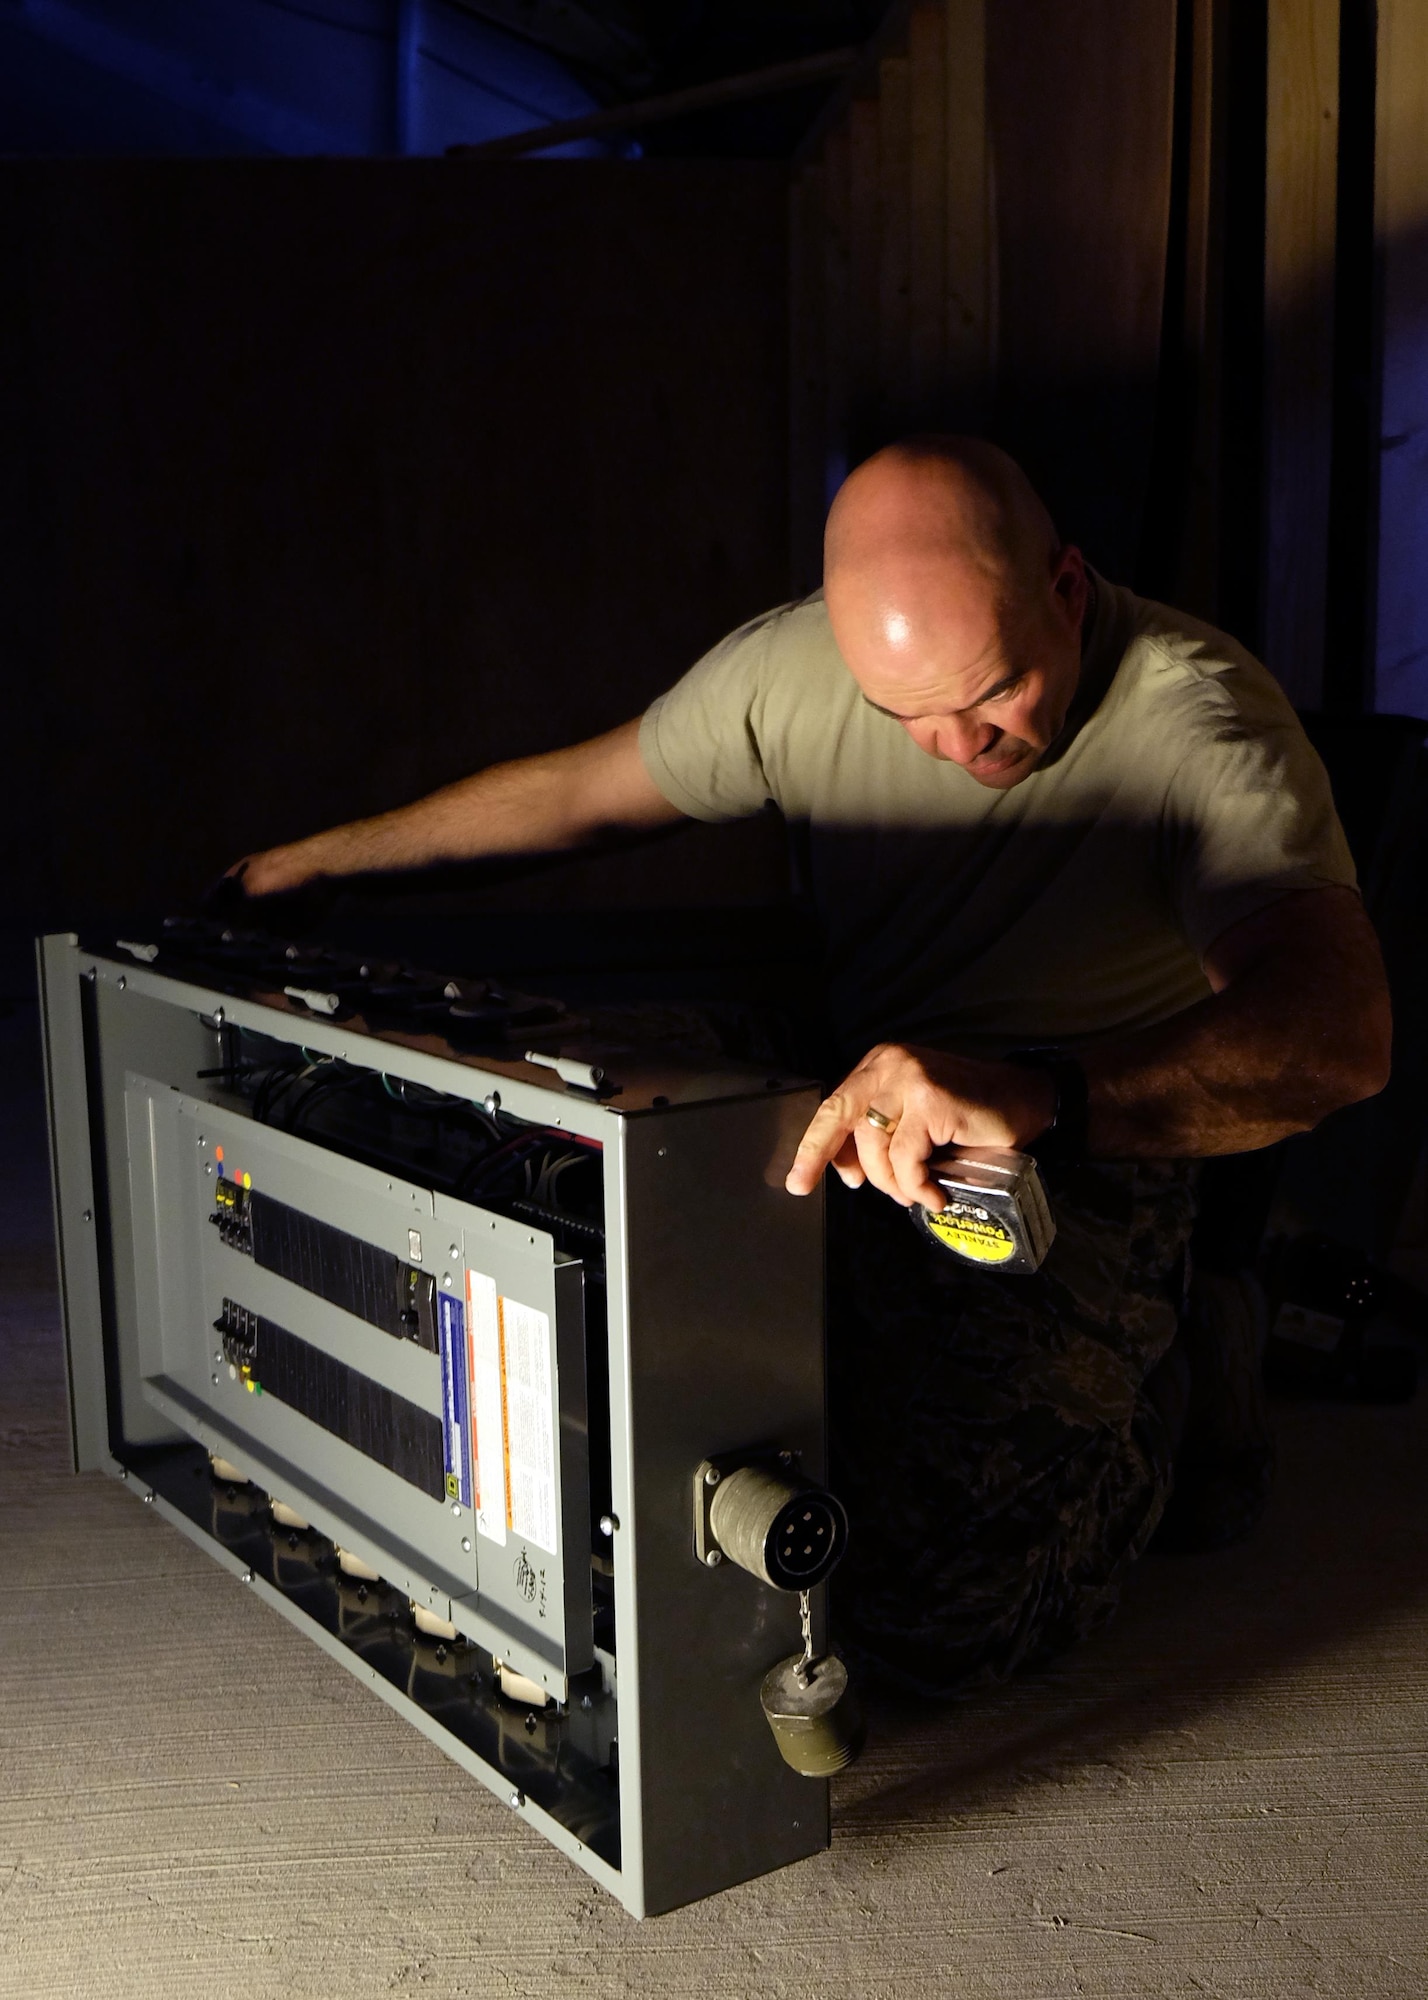 Tech. Sgt. Peter, 380th Expeditionary Civil Engineer Squadron electrician, measures a circuit-breaker box prior to mounting May 16, 2017, in southwest Asia. The 380th ECES is responsible for constructing and maintaining every US-controlled building on the installation. The project provided the 727th Expeditionary Air Control Squadron with offices inside a protective structure. (U.S. Air Force photo by Senior Airman Preston Webb)